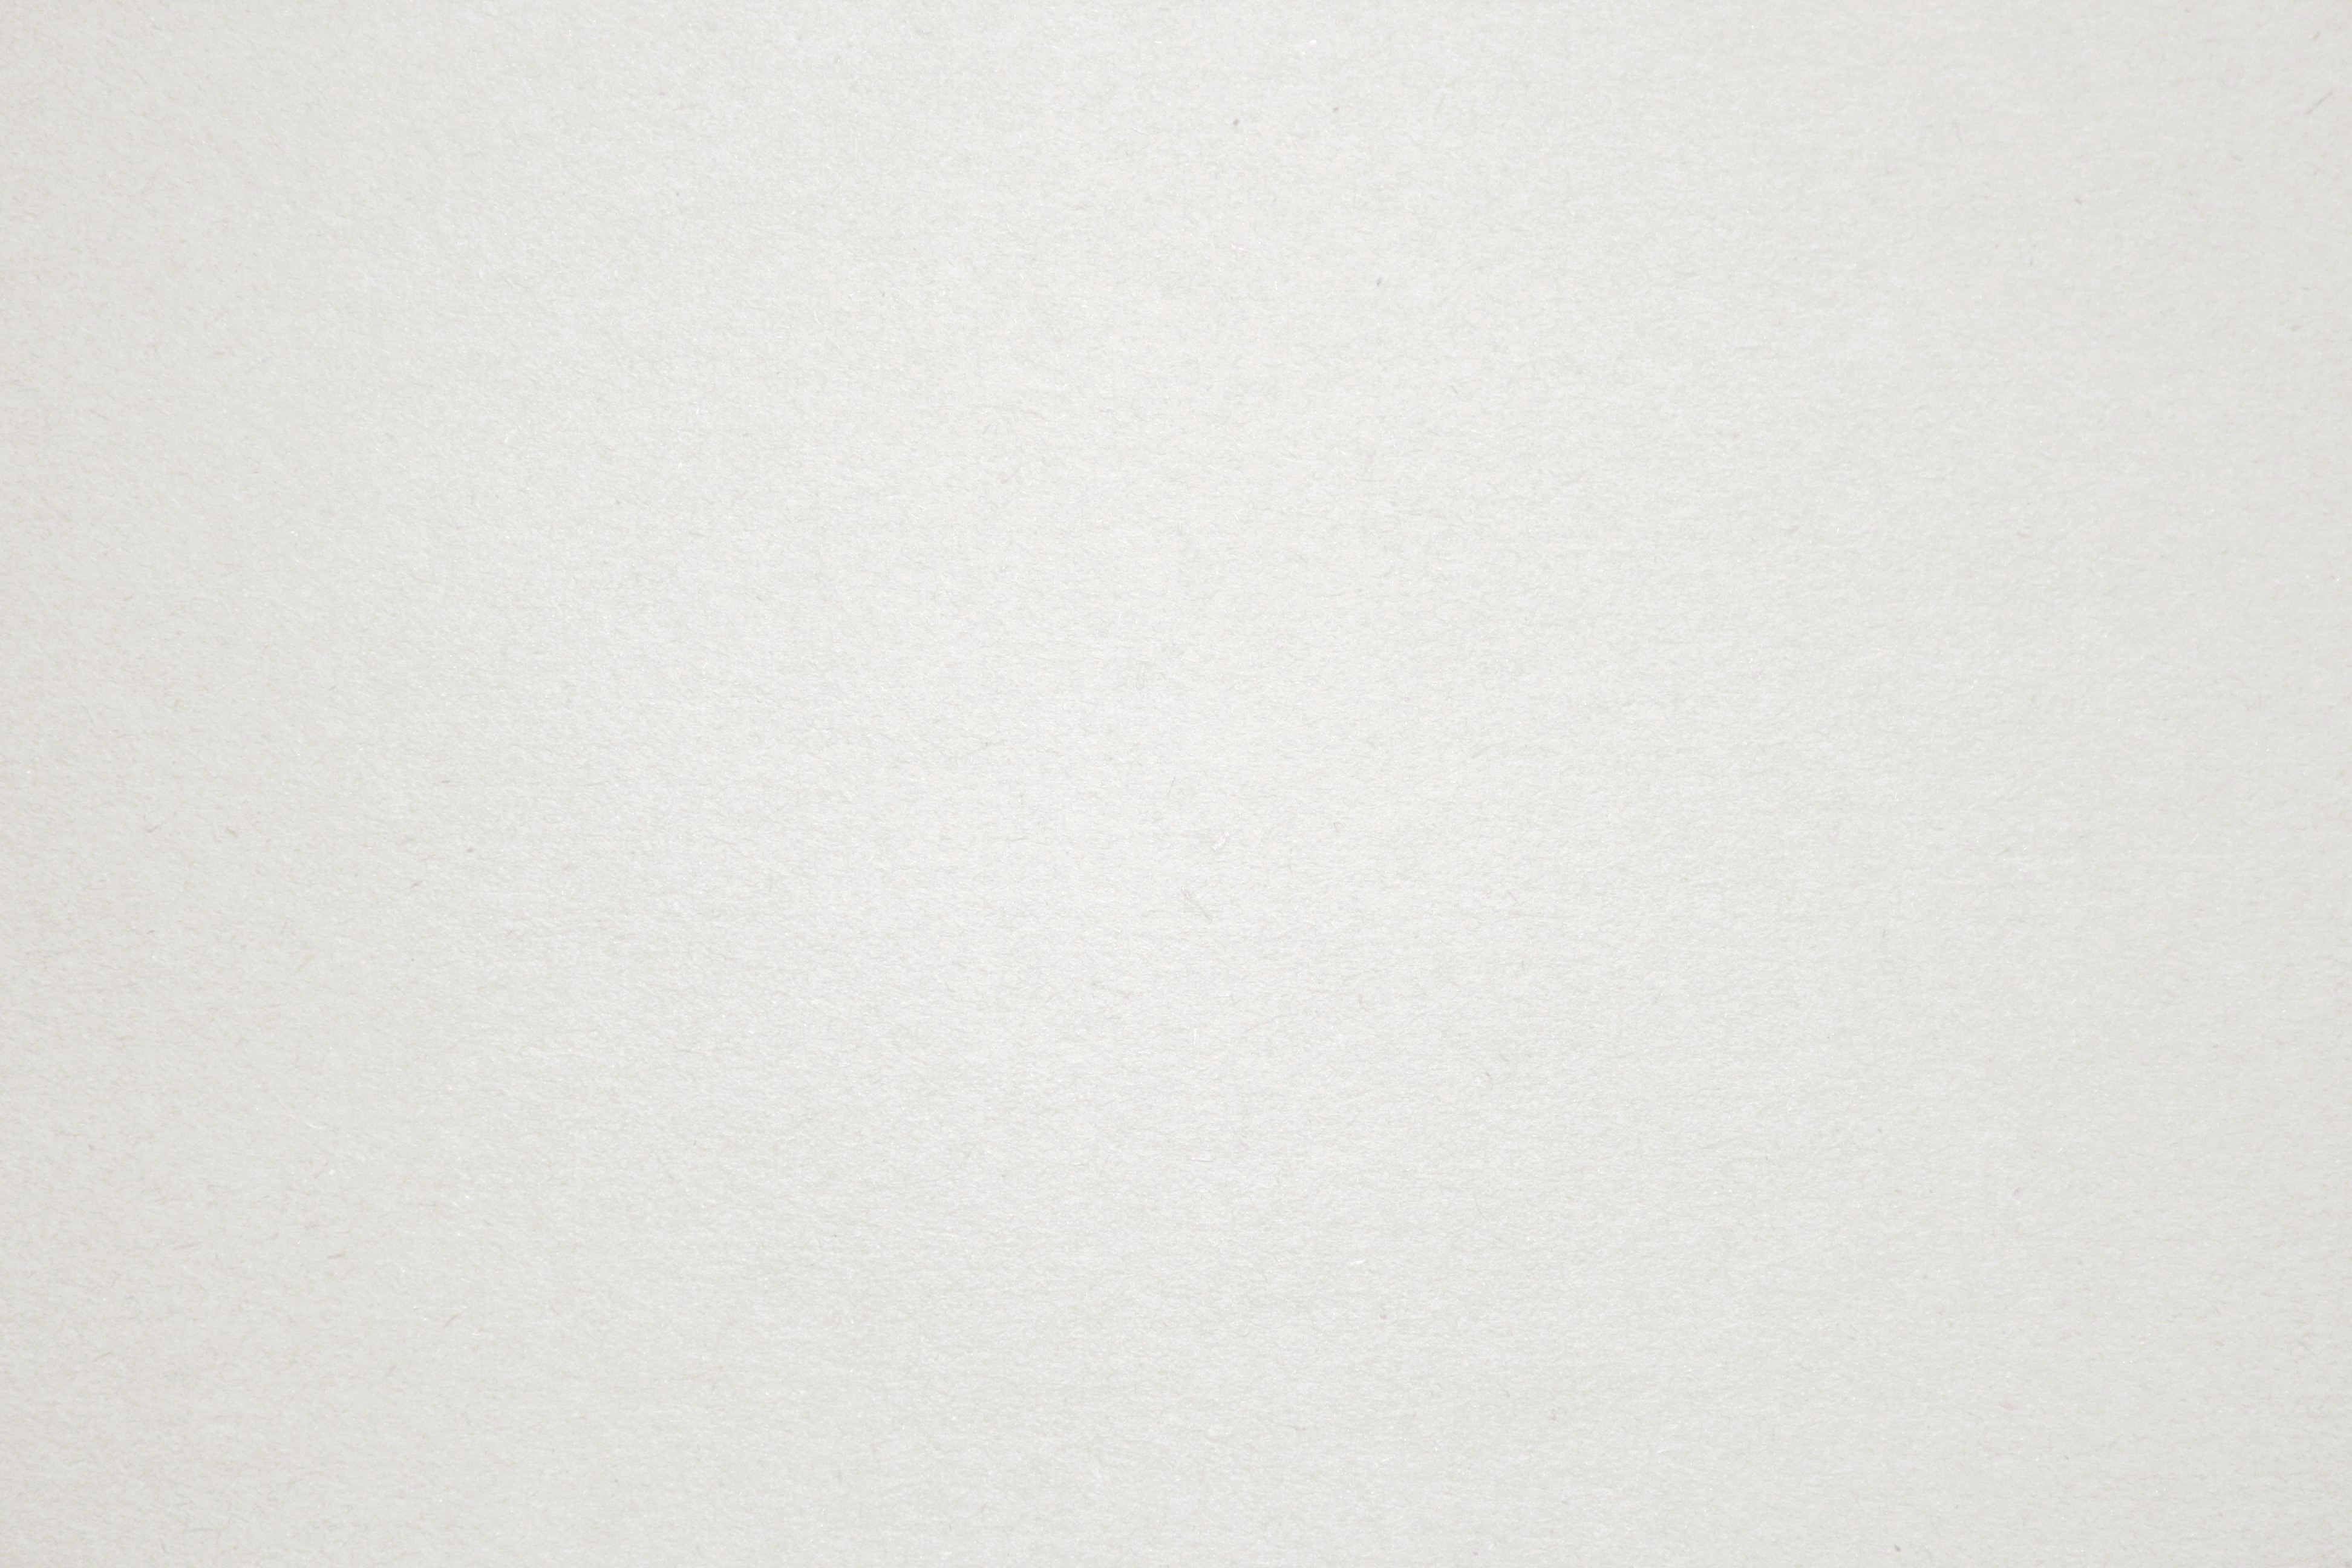 Seamless Paper Texture Images - Free Download on Freepik